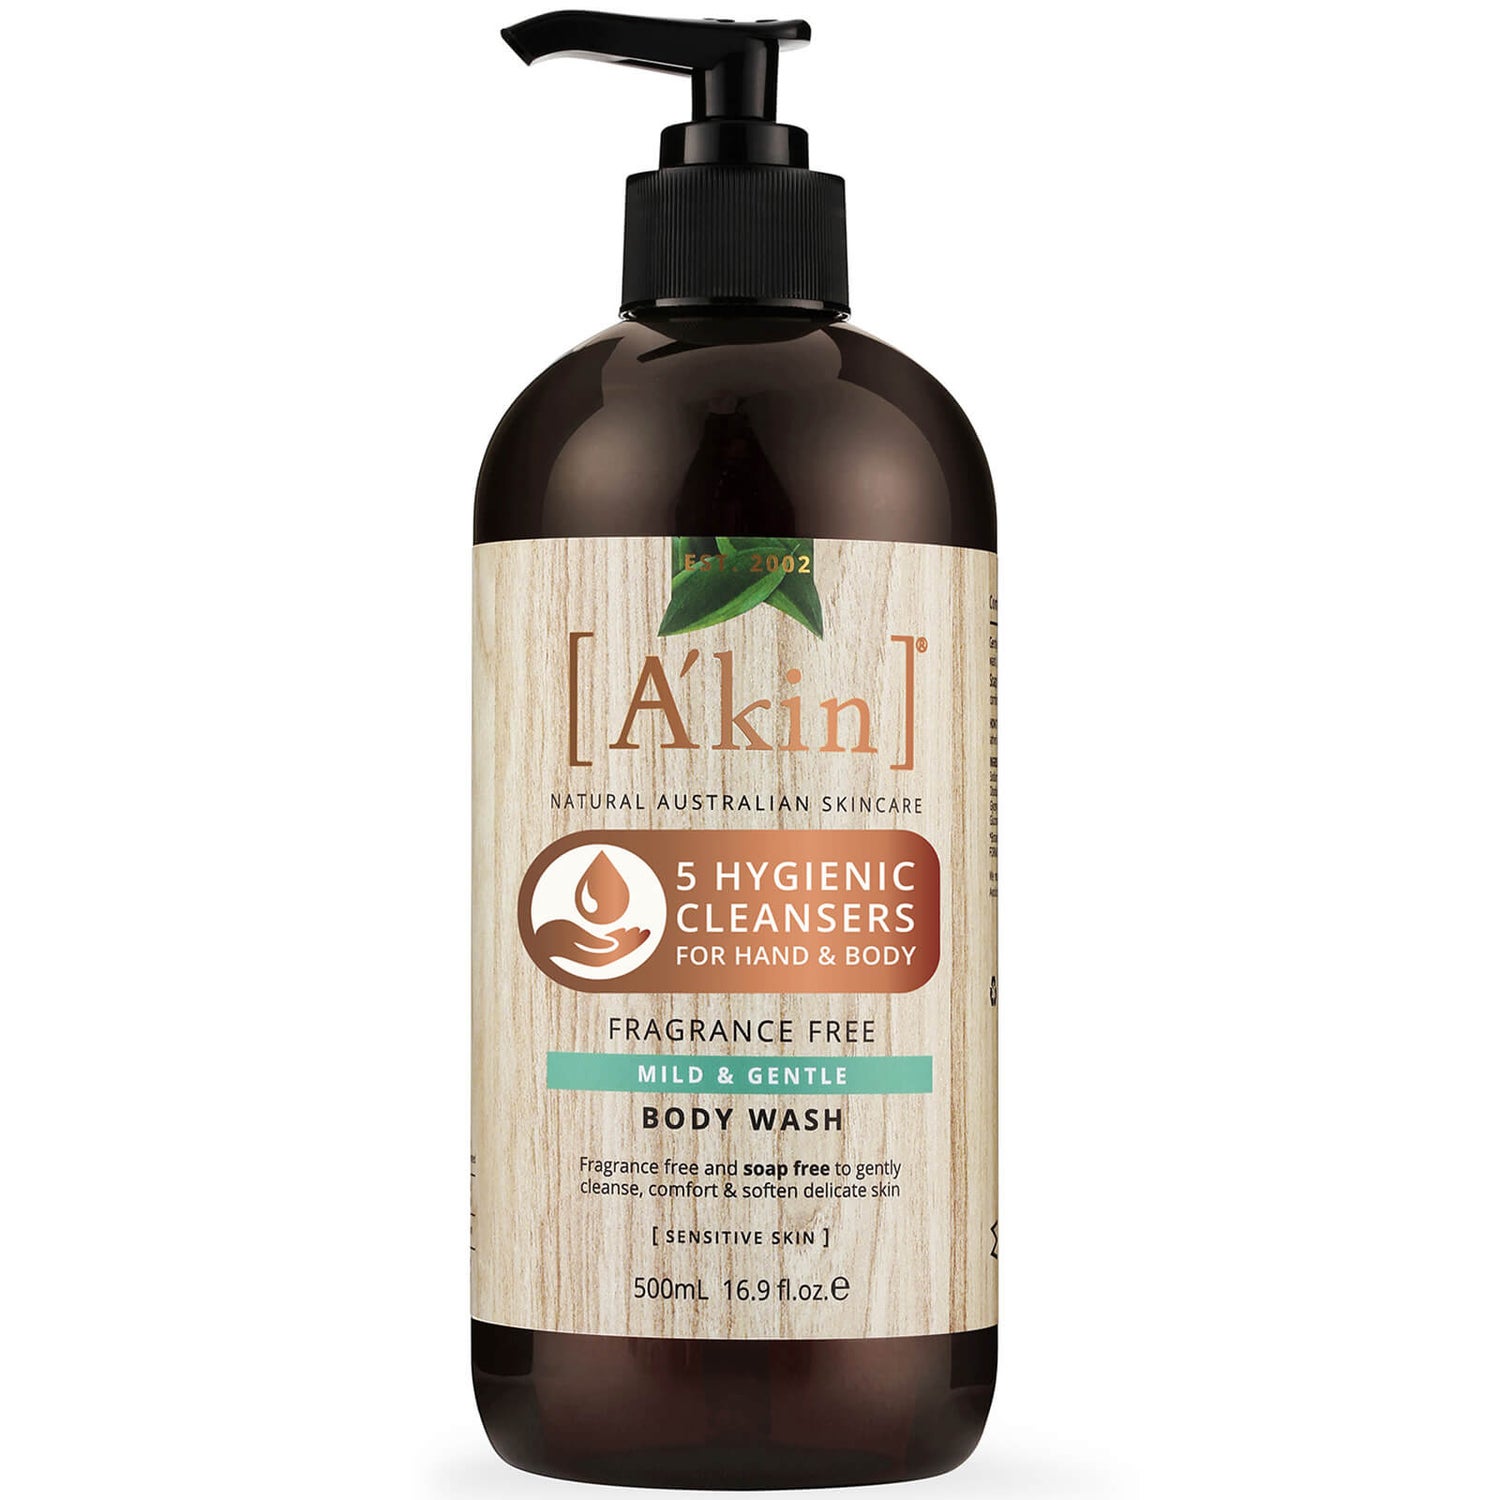 A'kin Uniquely Pure Very Gentle Body Wash 500ml - Unscented